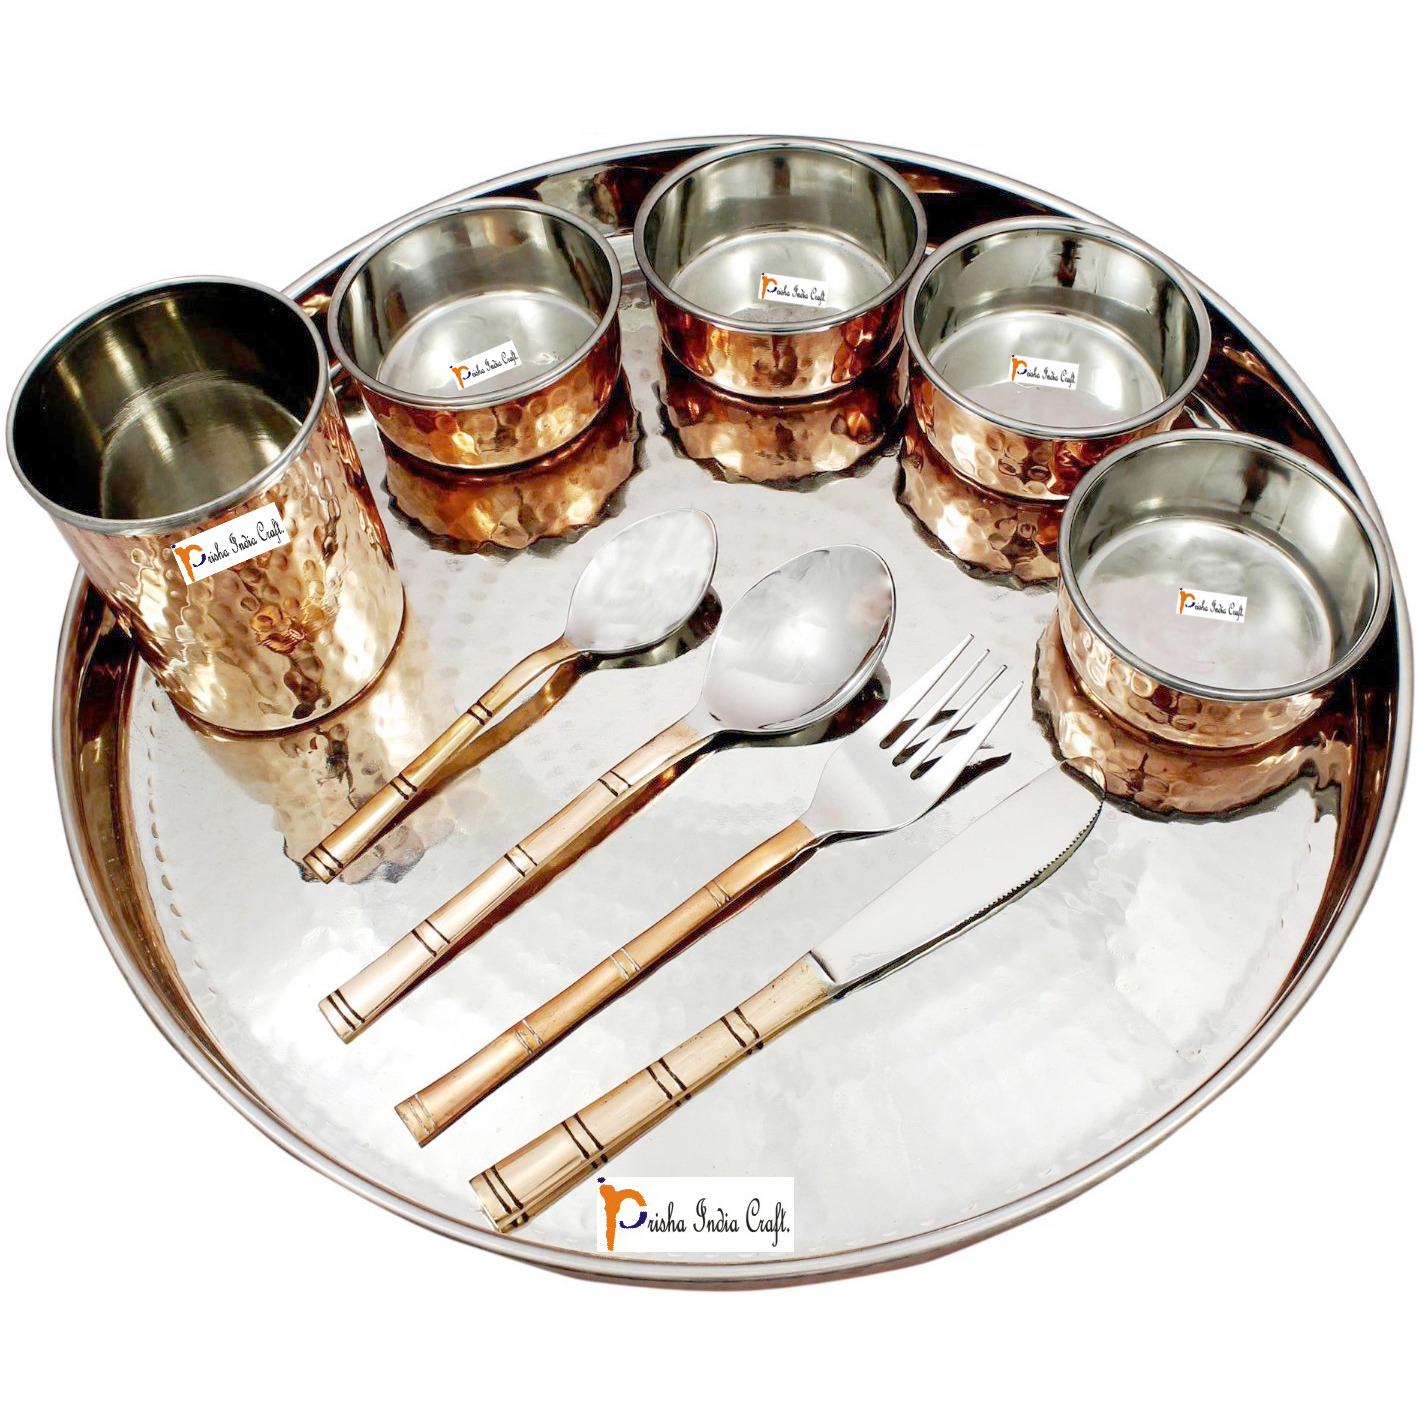 Prisha India Craft B. Dinnerware Traditional Stainless Steel Copper Dinner Set of Thali Plate, Bowls, Glass and Spoons, Dia 13  With 1 Pure Copper Mughal Pitcher Jug - Christmas Gift